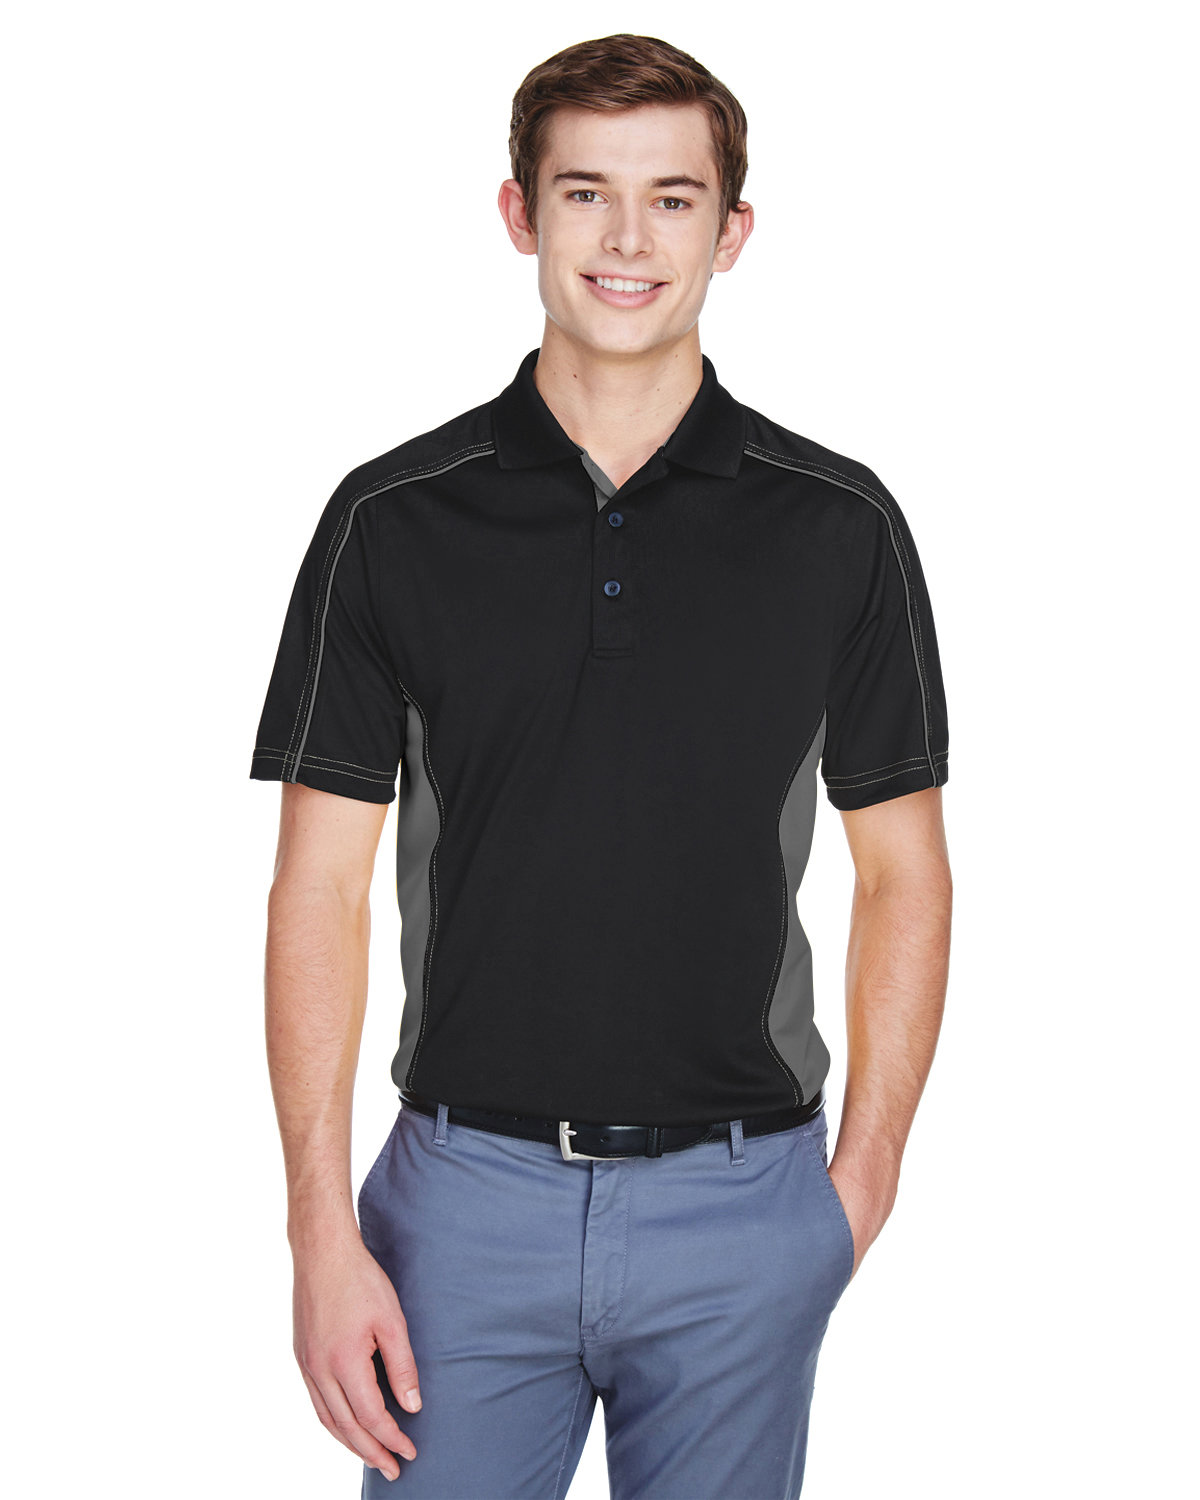 Extreme Men's Eperformance™ Fuse Snag Protection Plus Colorblock Polo BLACK/ CARBON 